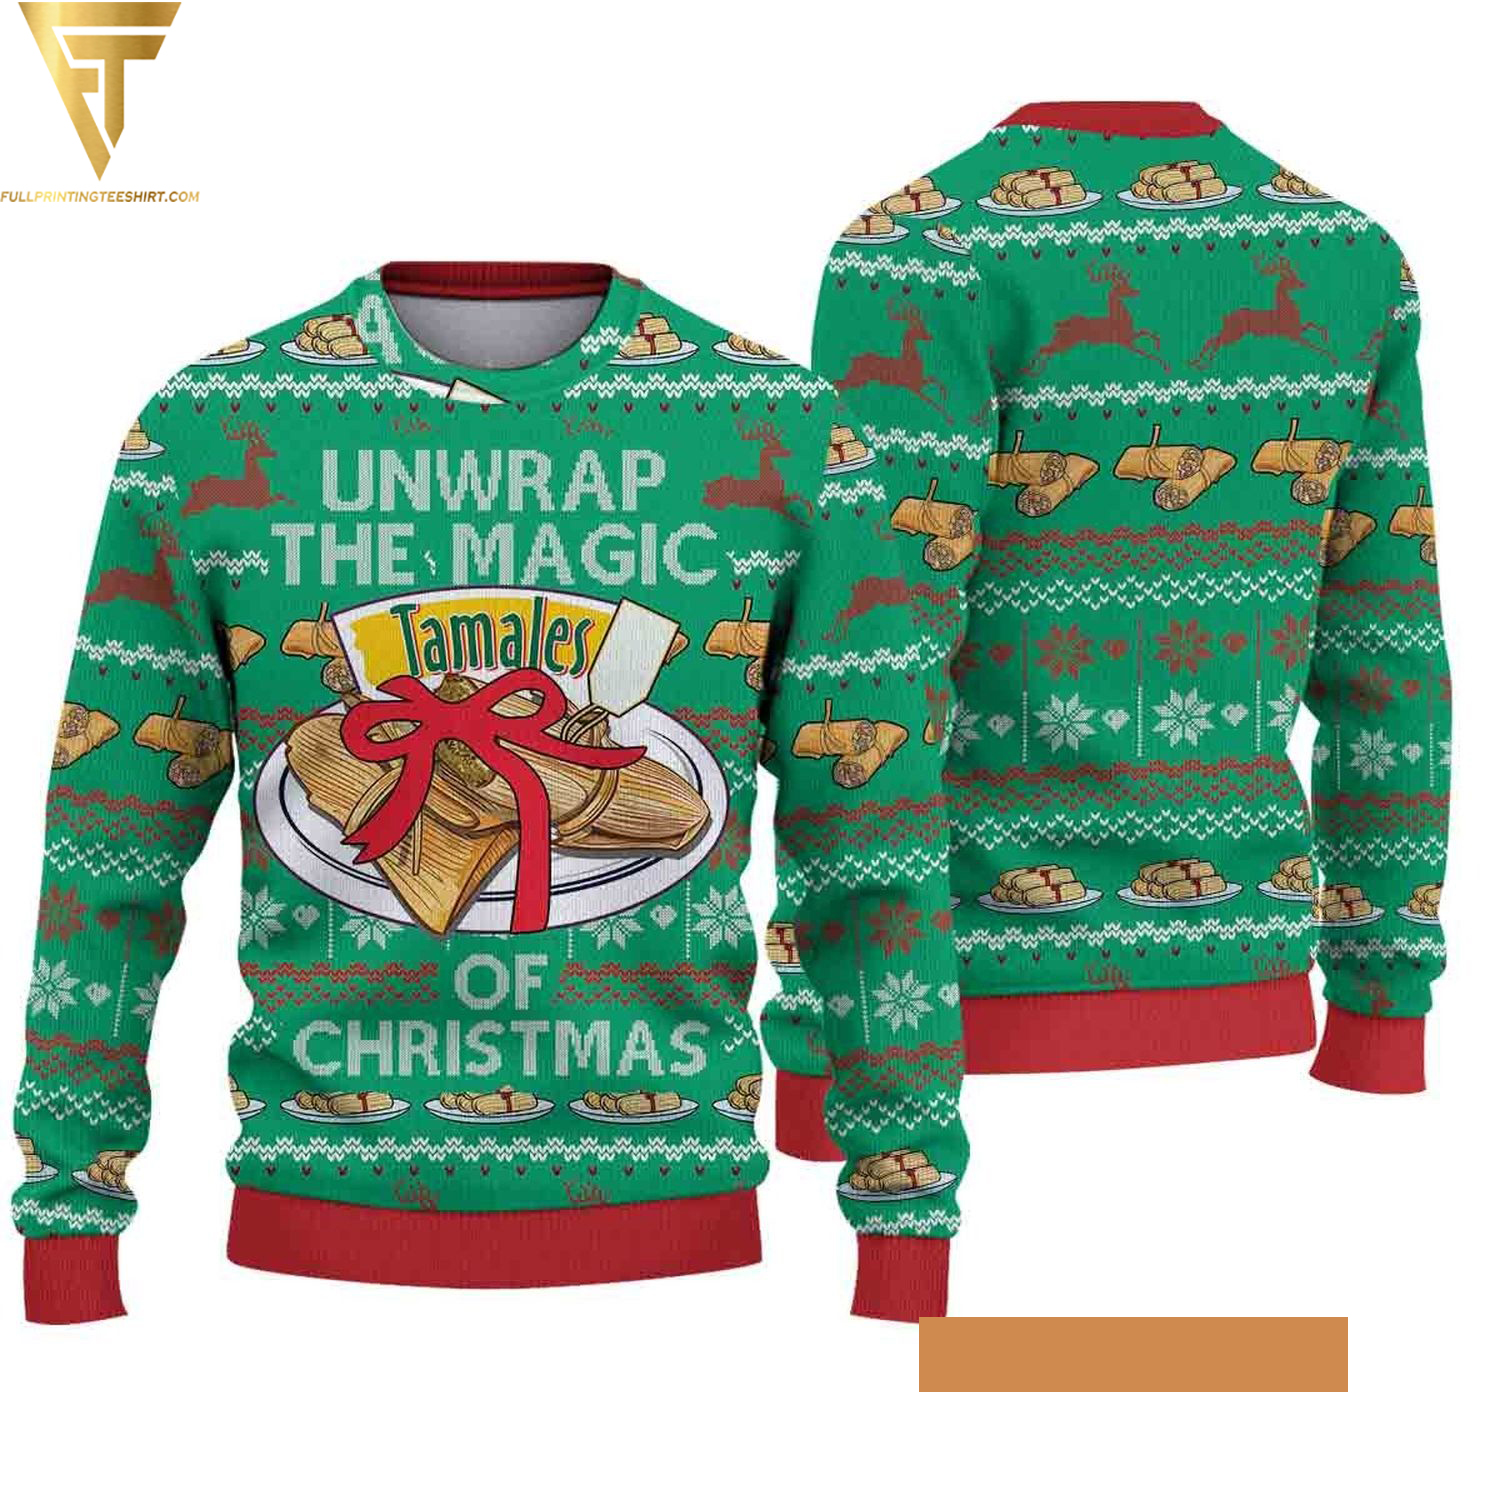 Unwrap the magic of christmas ugly christmas sweater - Copy (2)